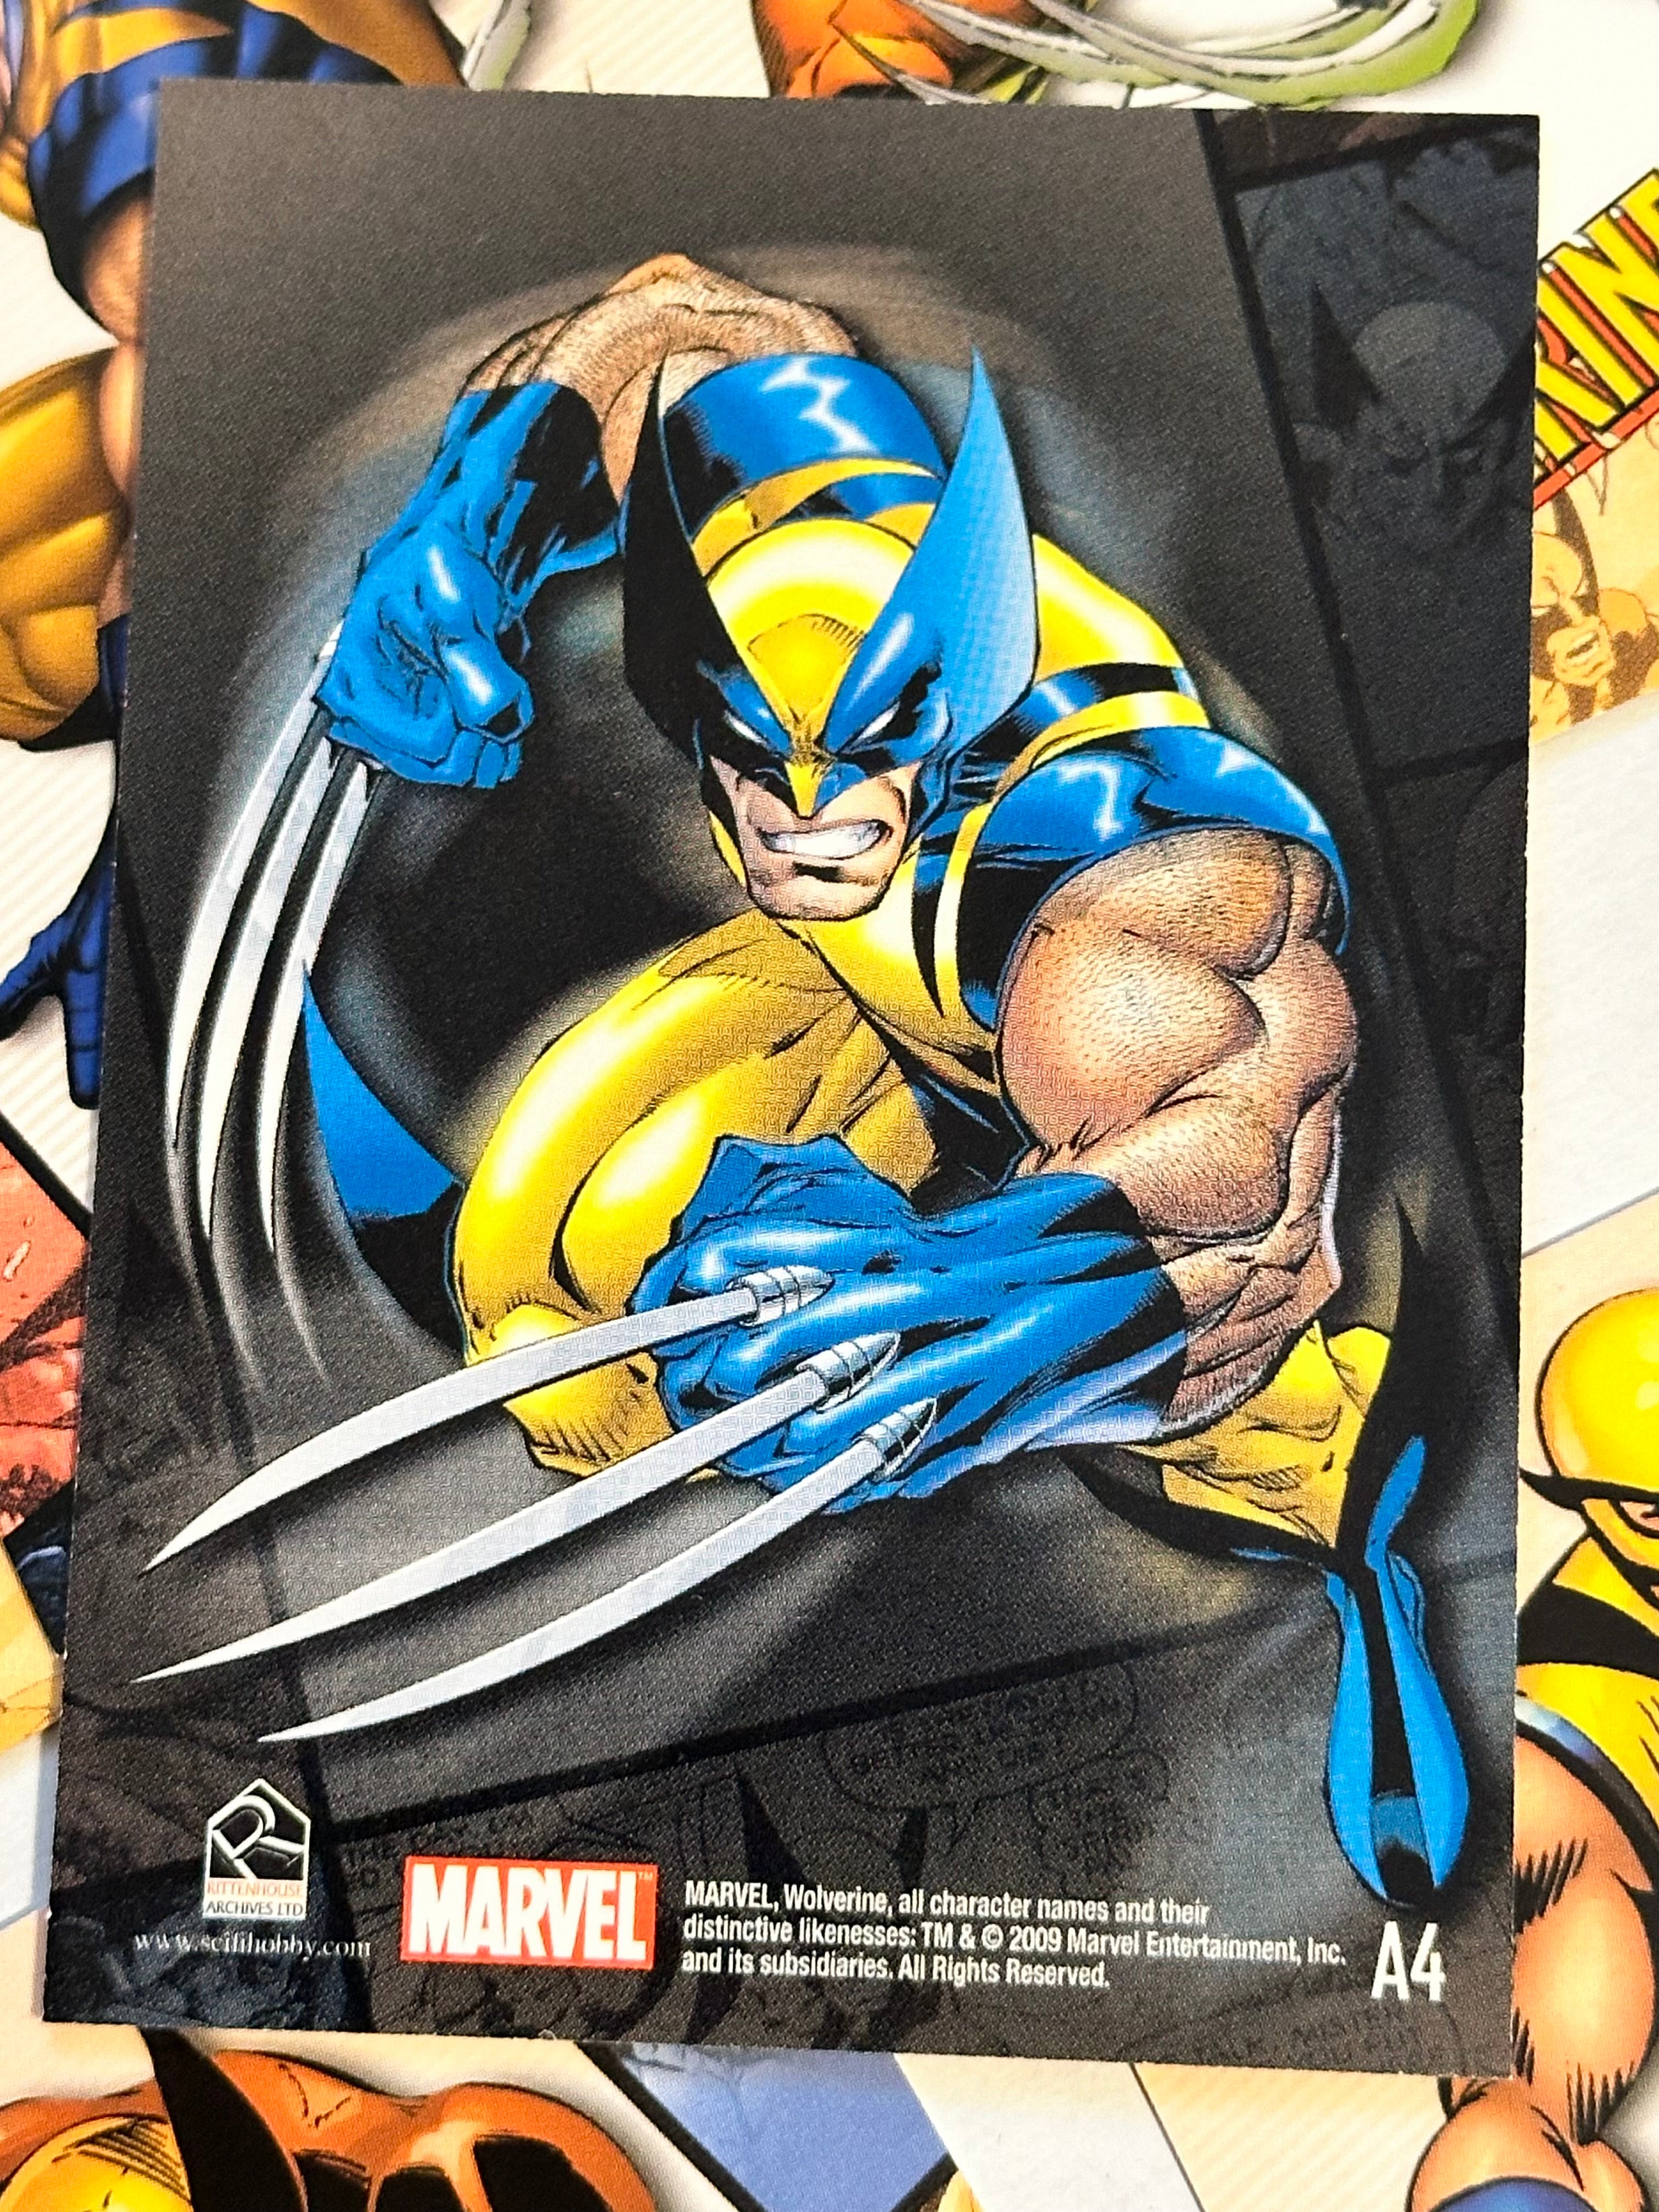 Great condition and find rare Marvel Wolverine insert cards set 2009